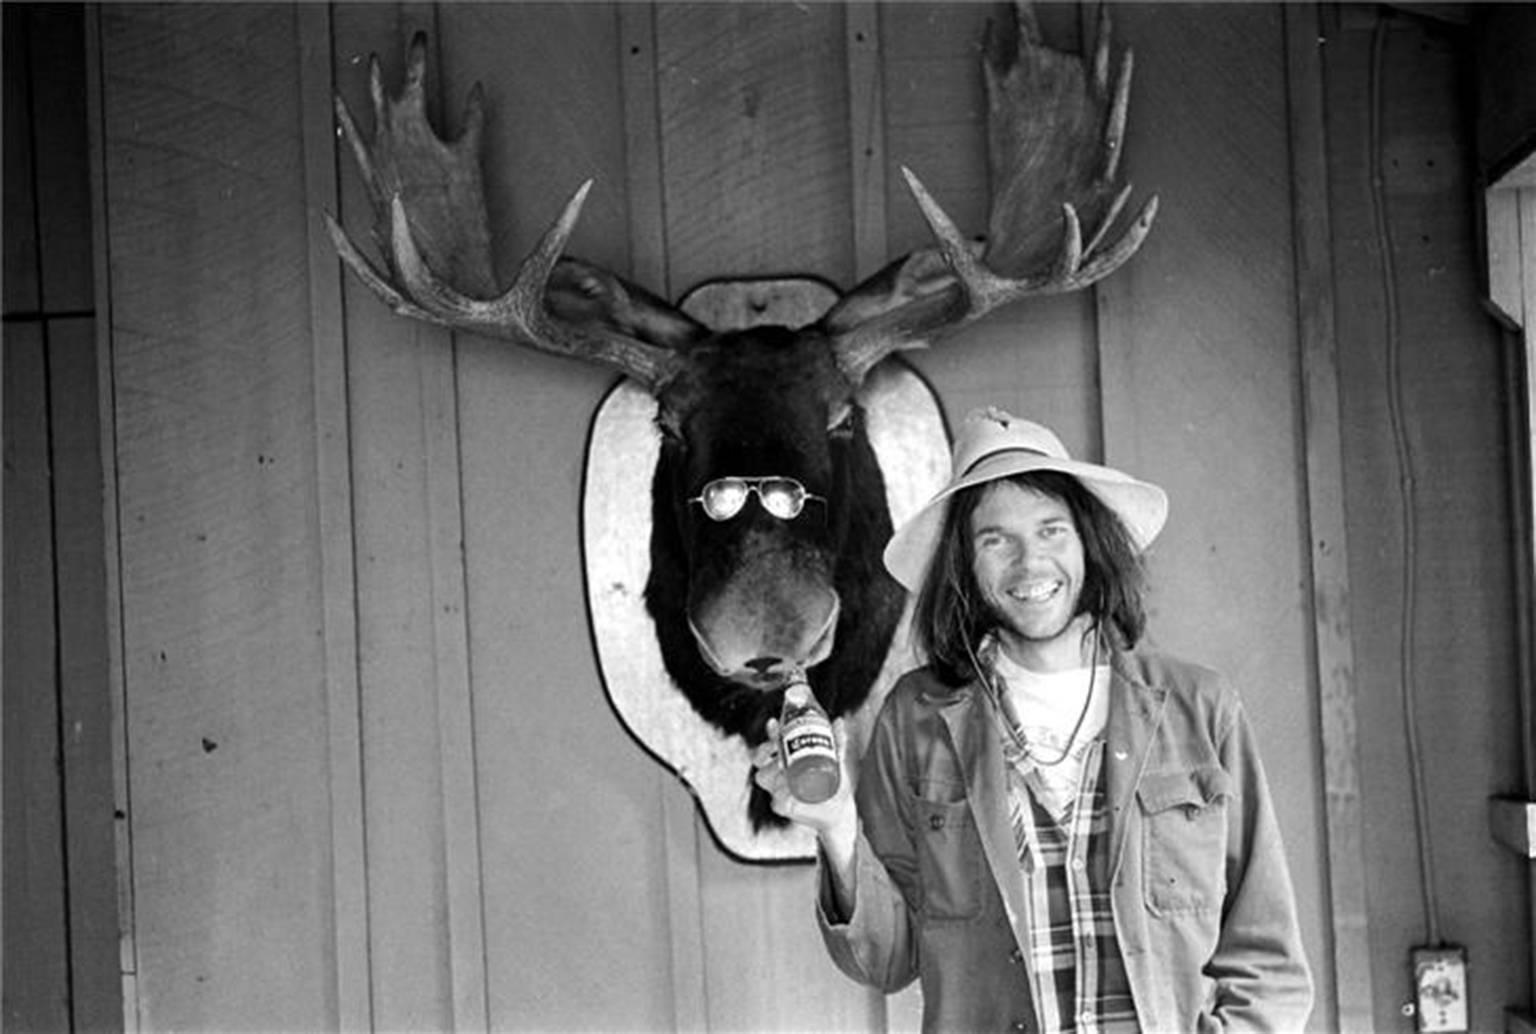 Henry Diltz Black and White Photograph - Neil Young "Moose" 1975